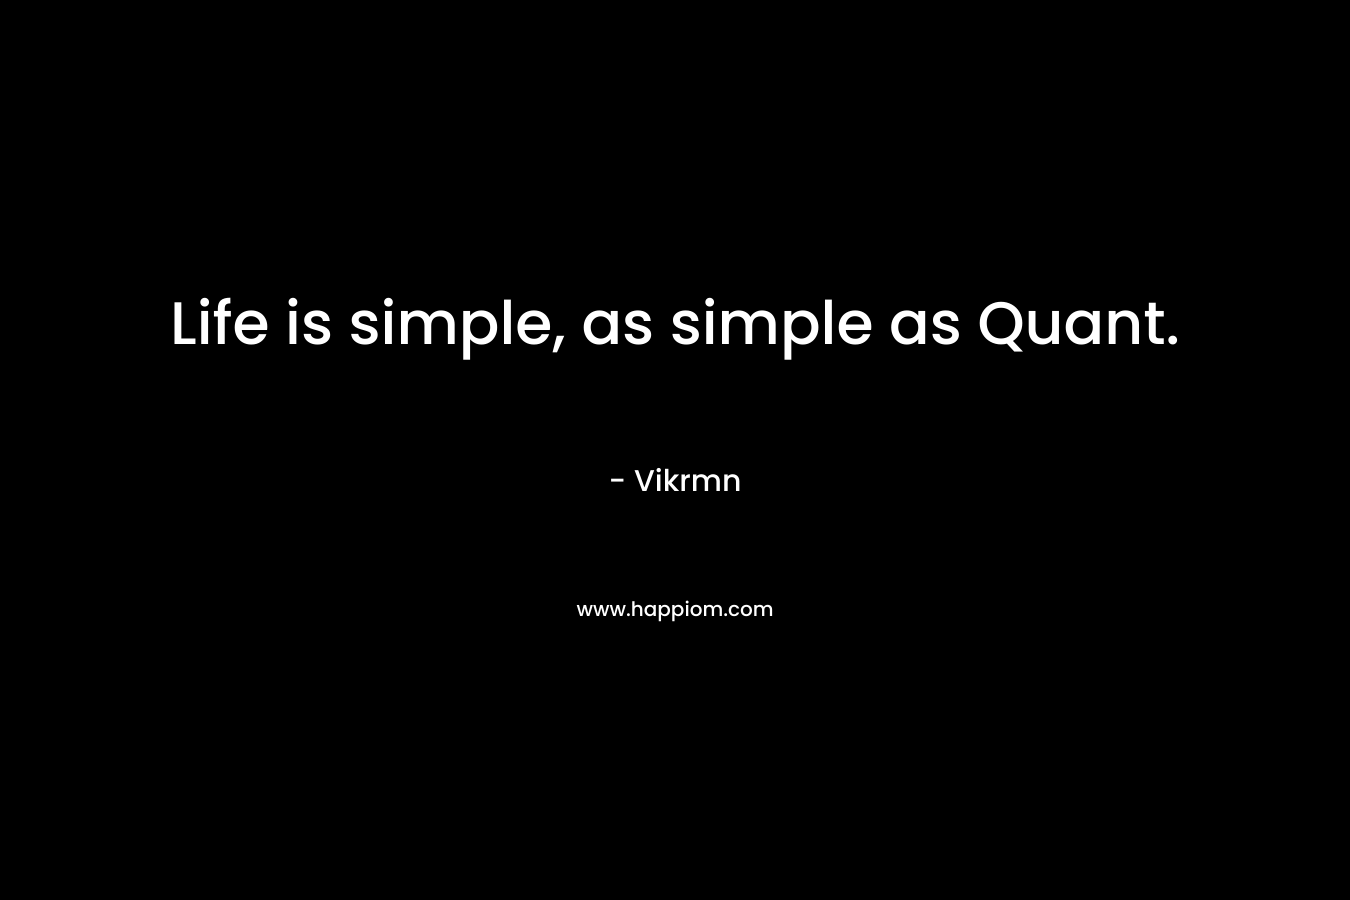 Life is simple, as simple as Quant.